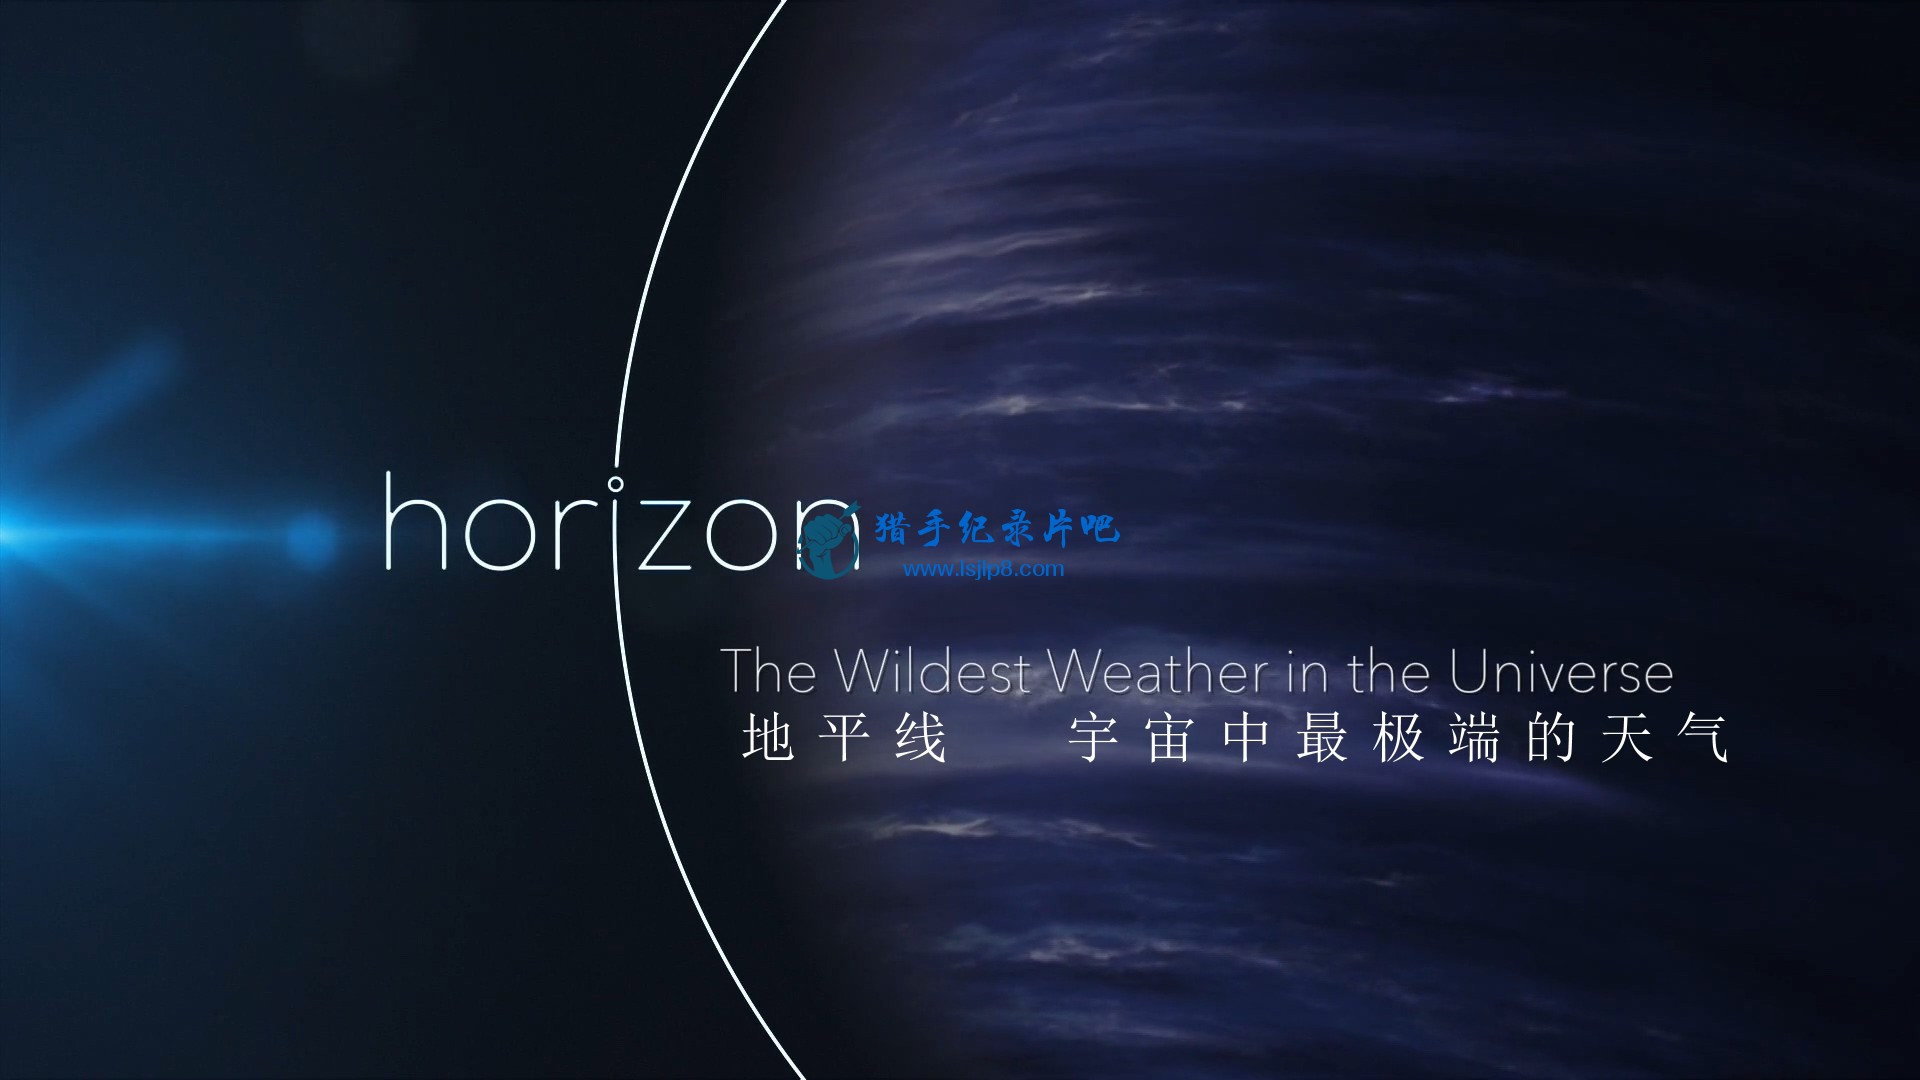 BBC.Horizon.2016.The.Wildest.Weather.in.the.Universe.1080p.HDTV.x264.AAC.MVGroup.jpg